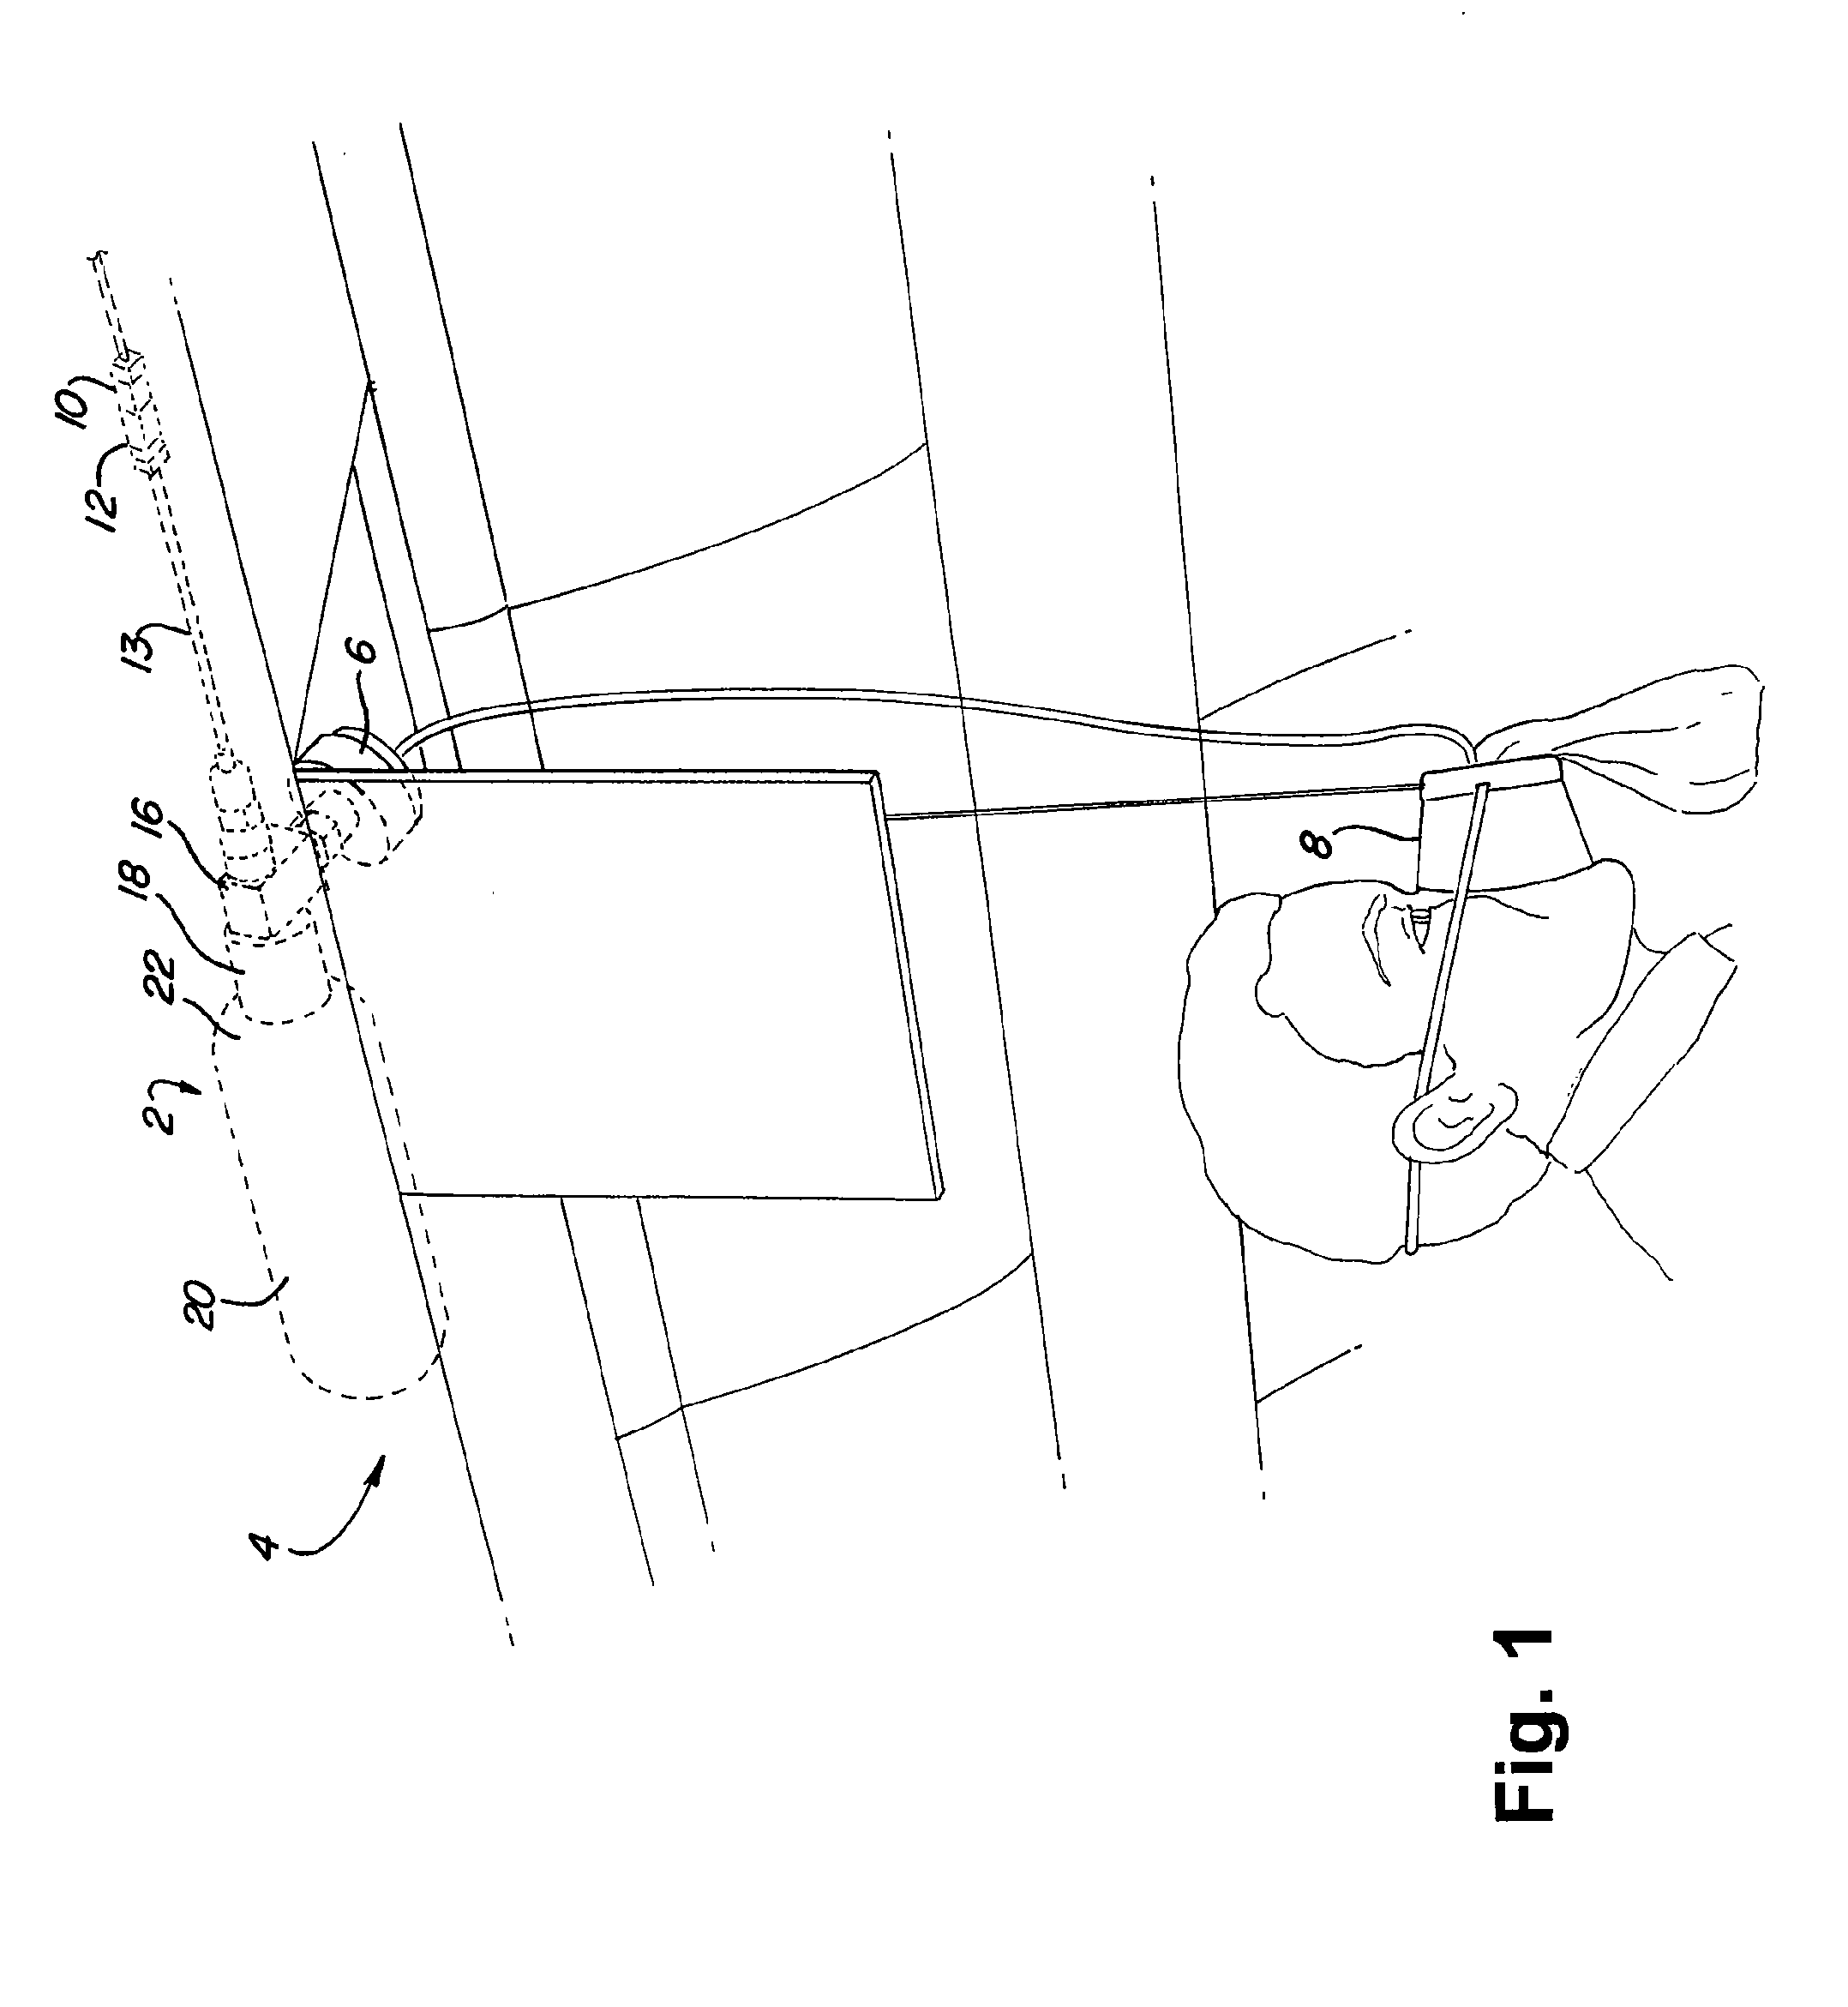 Hermetically welded sealed oxygen cylinder assembly and method of charging